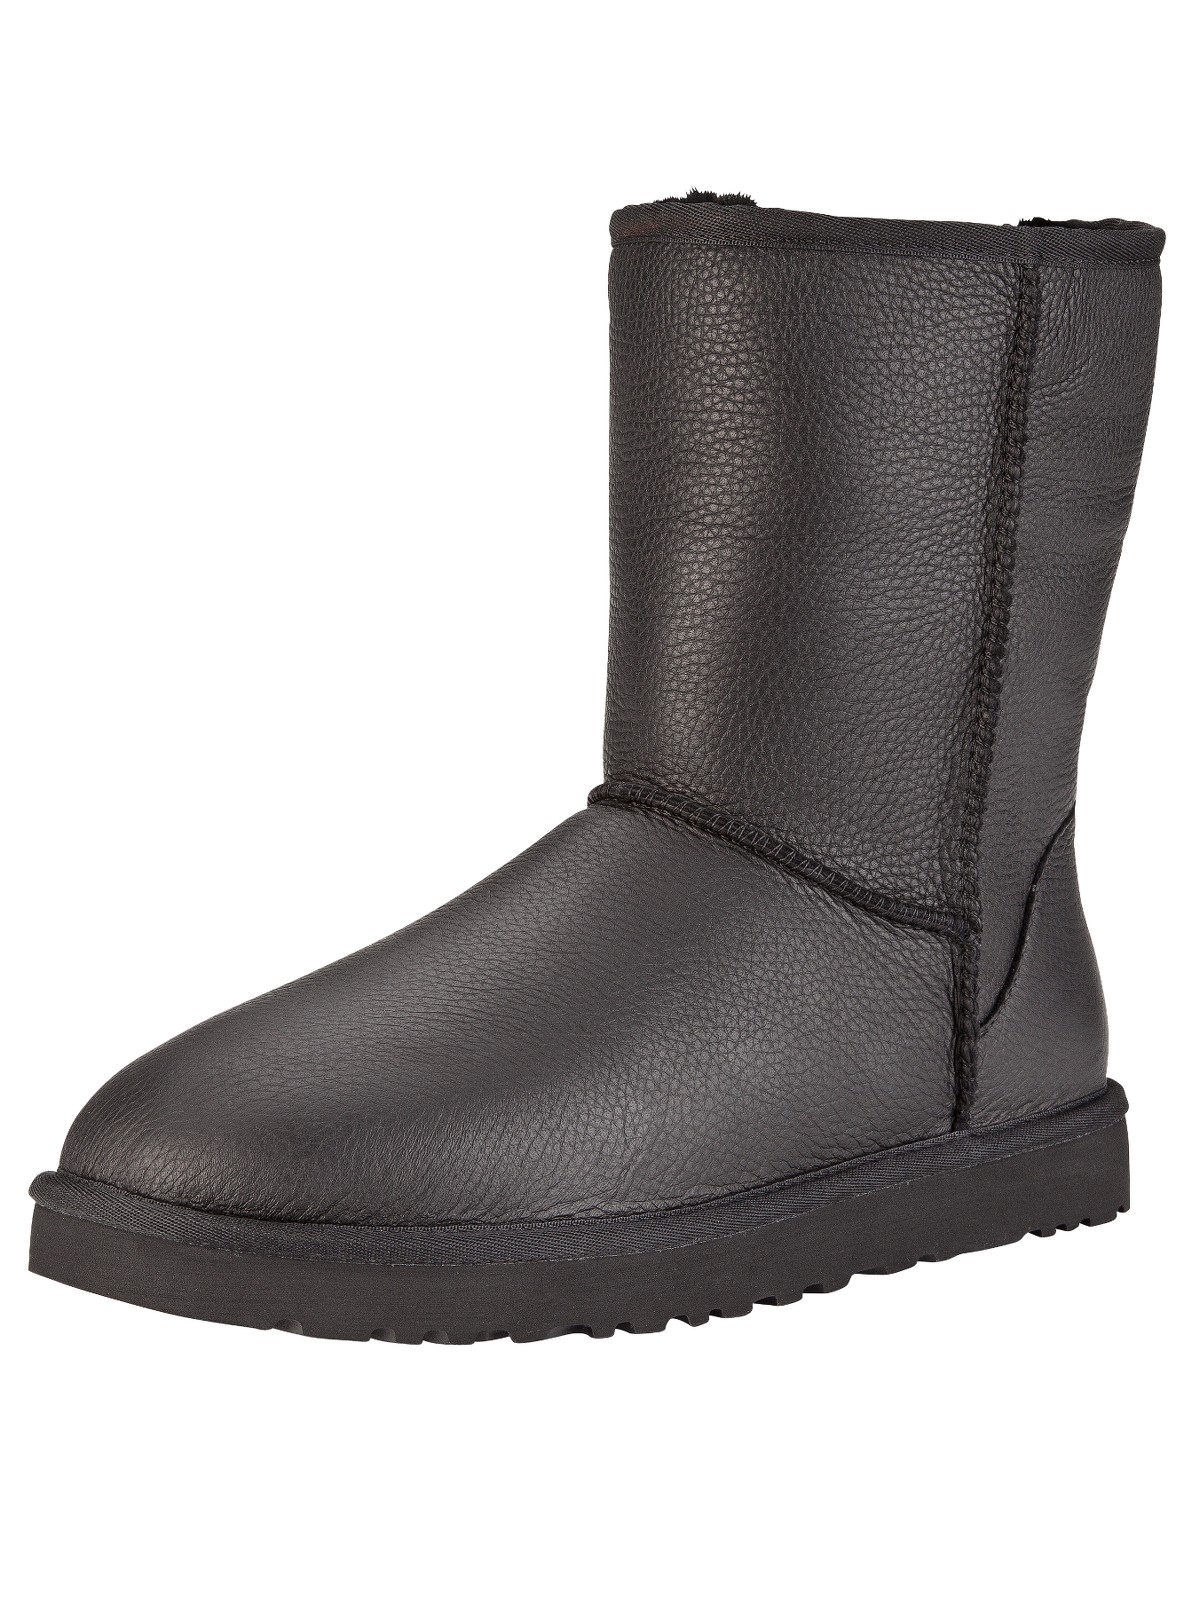 Ugg Ugg Australia Classic Short Leather Boots in Black | Lyst